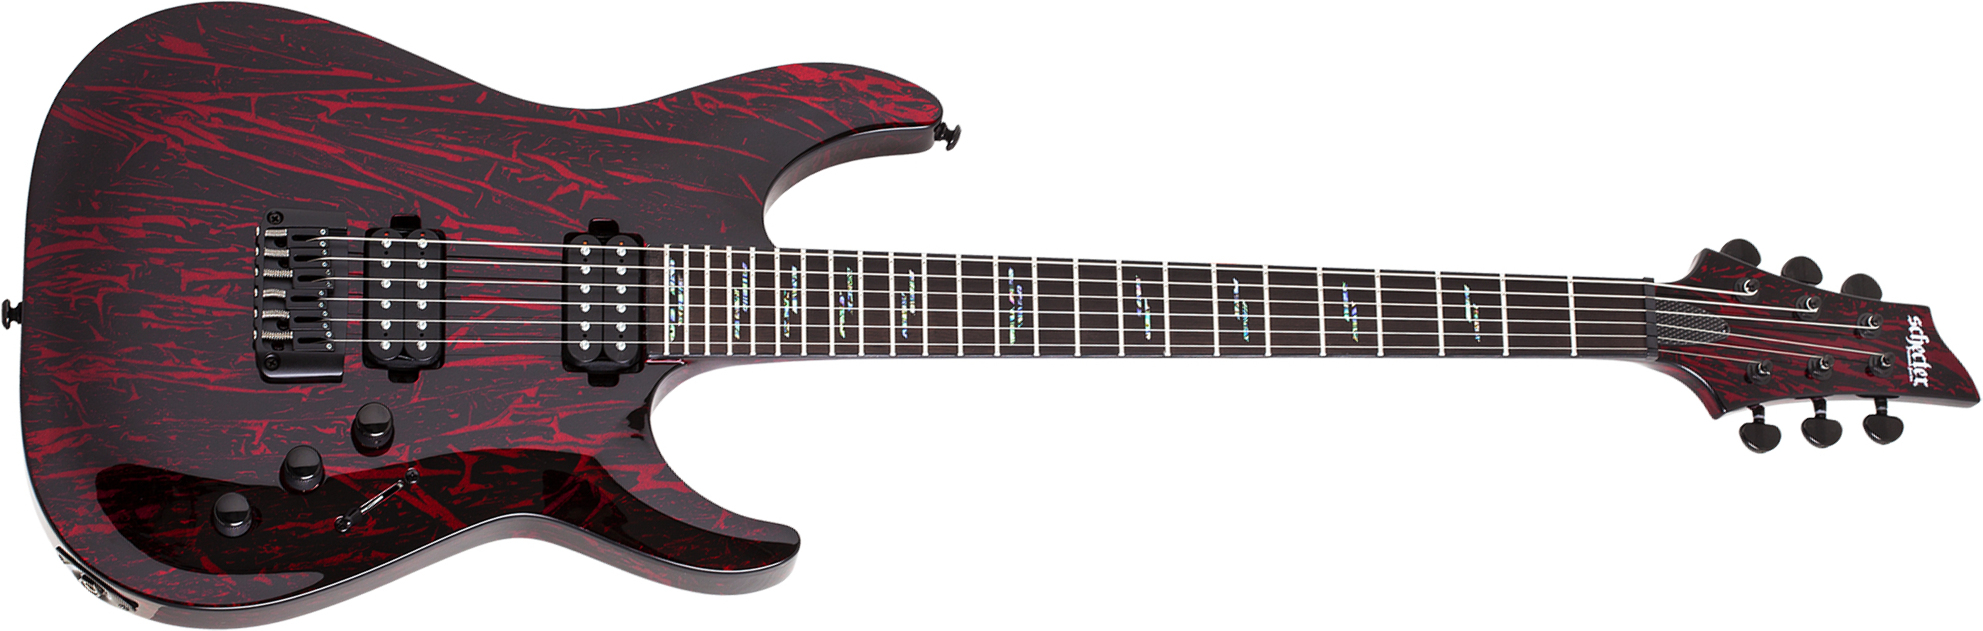 Schecter C-1 Silver Mountain 2h Ht Eb - Blood Moon - Str shape electric guitar - Main picture